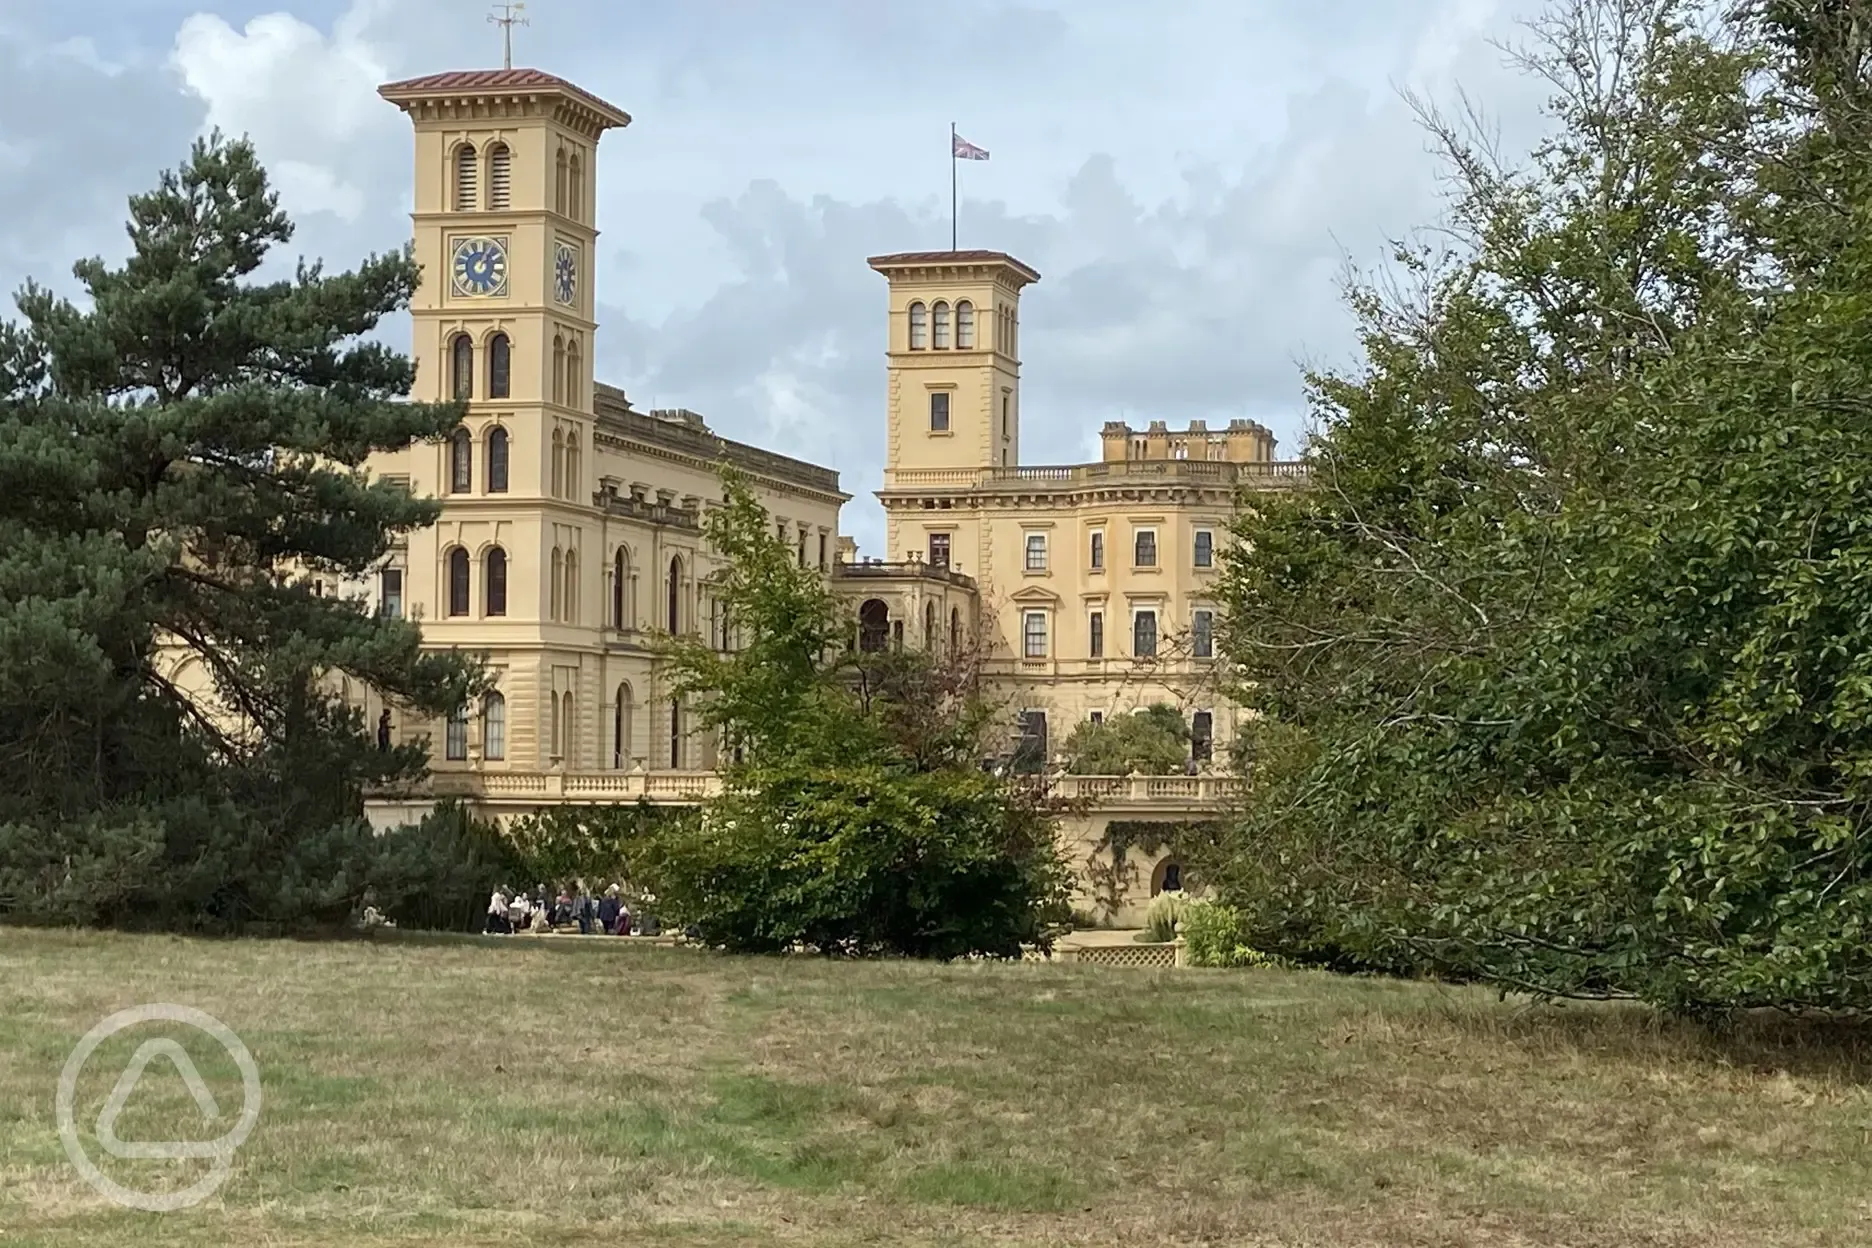 Osborne House (20 minutes from the site)